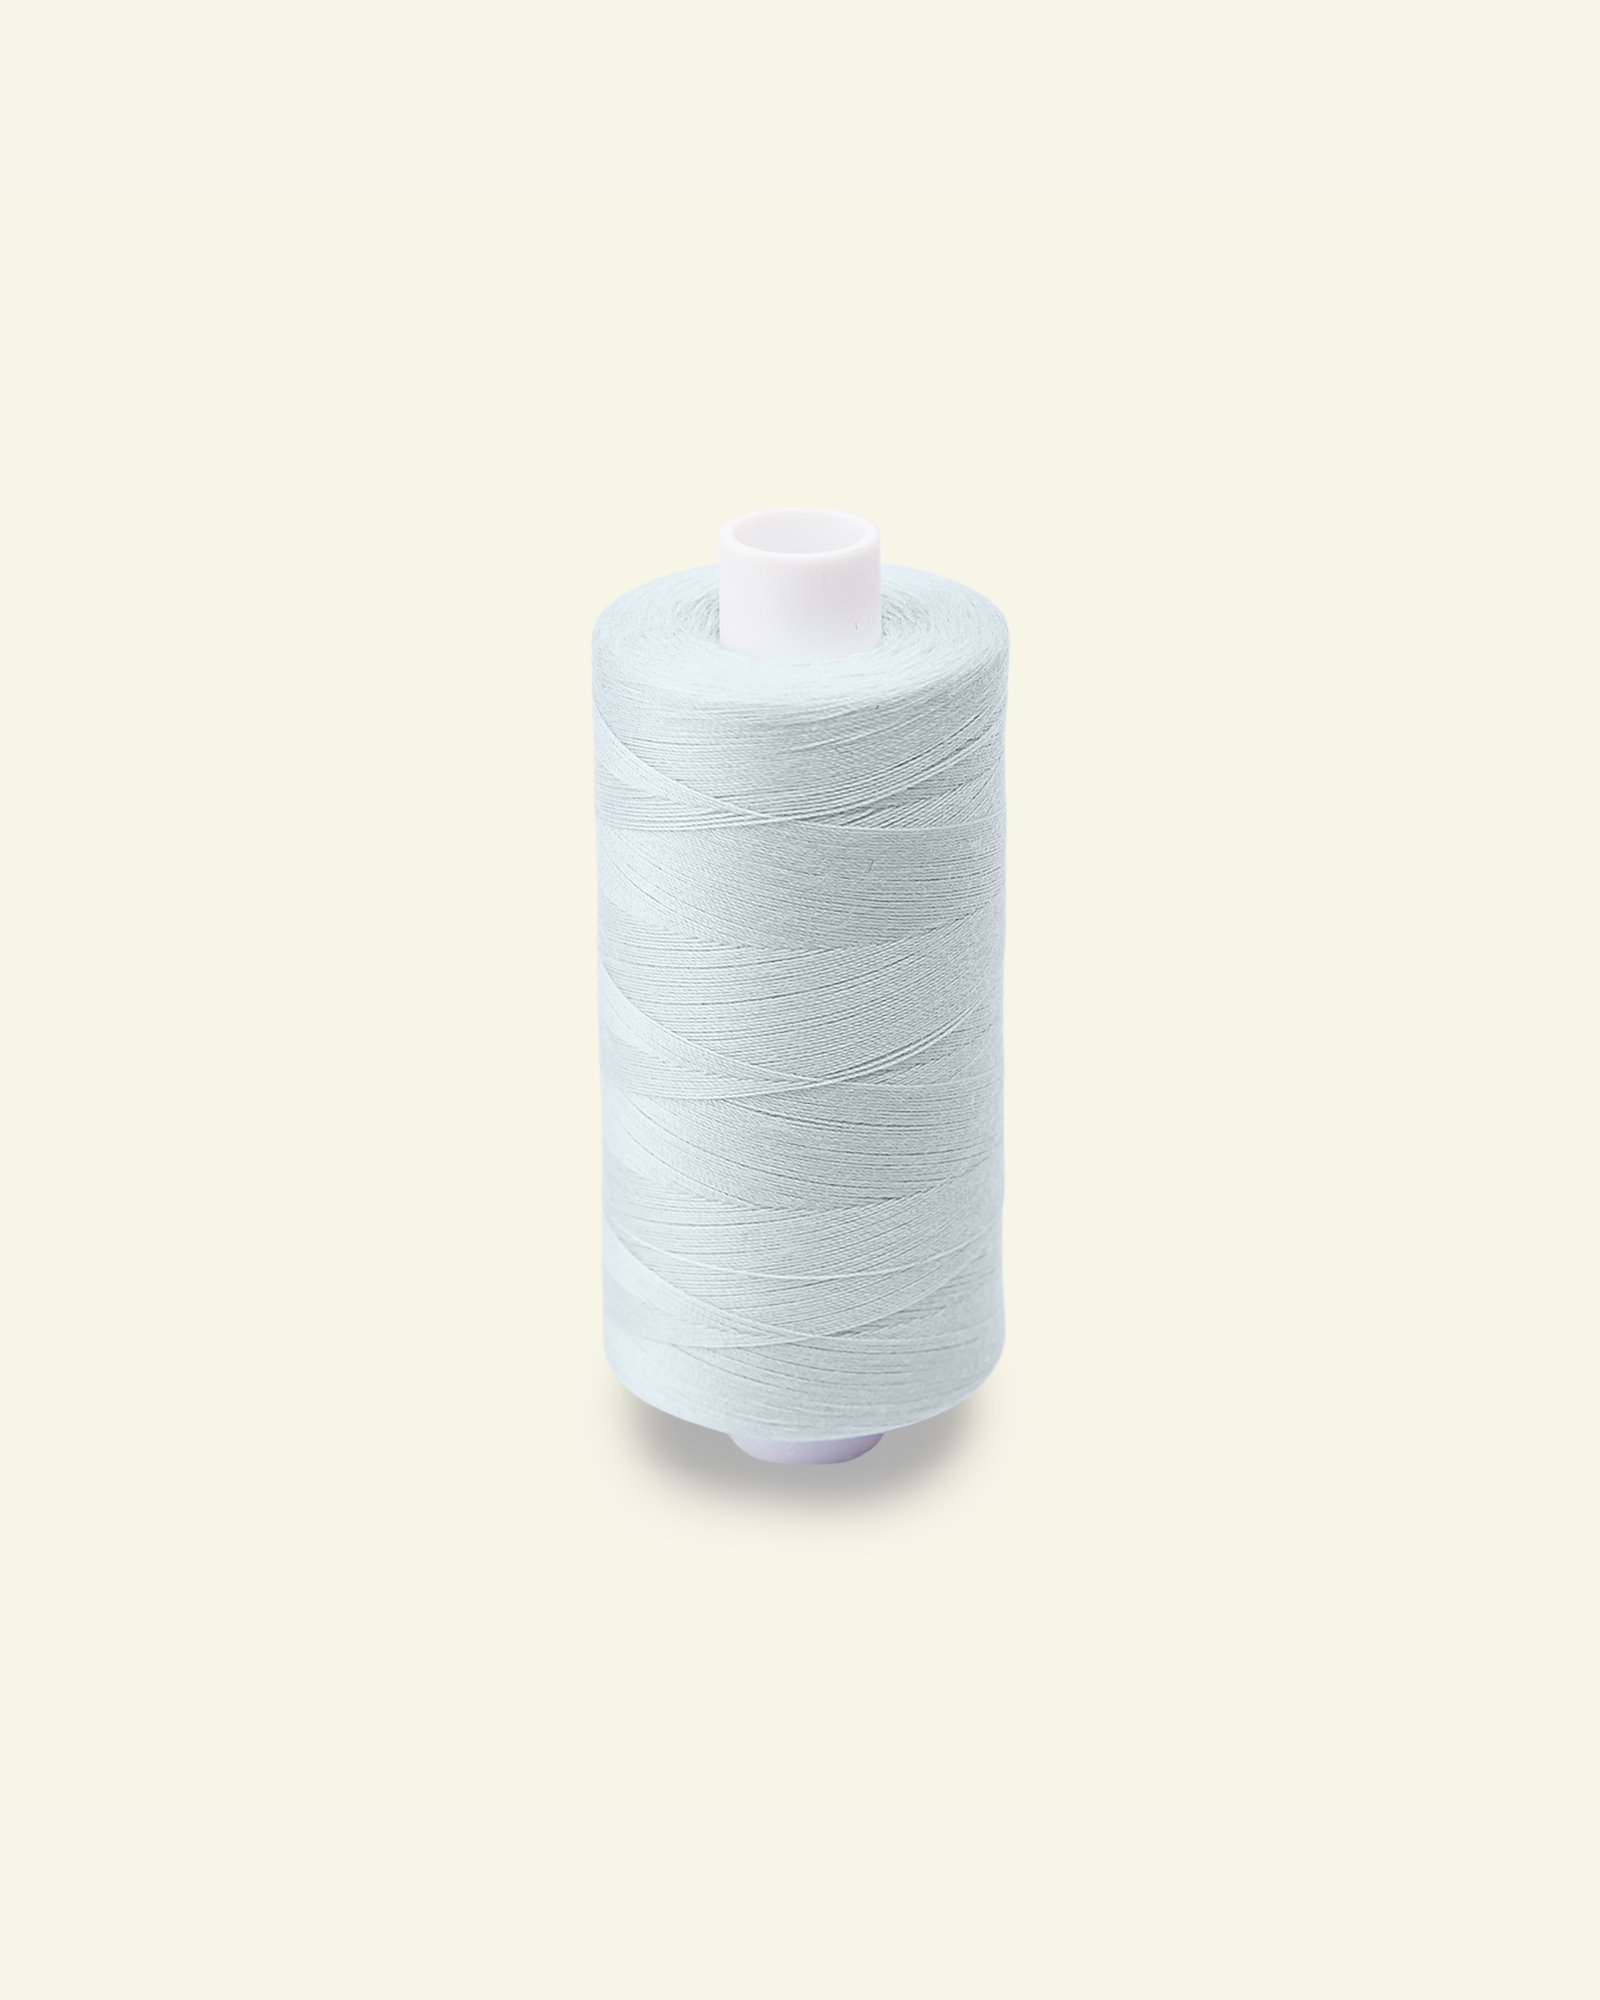 Sewing thread pale blue 1000m 12034_pack